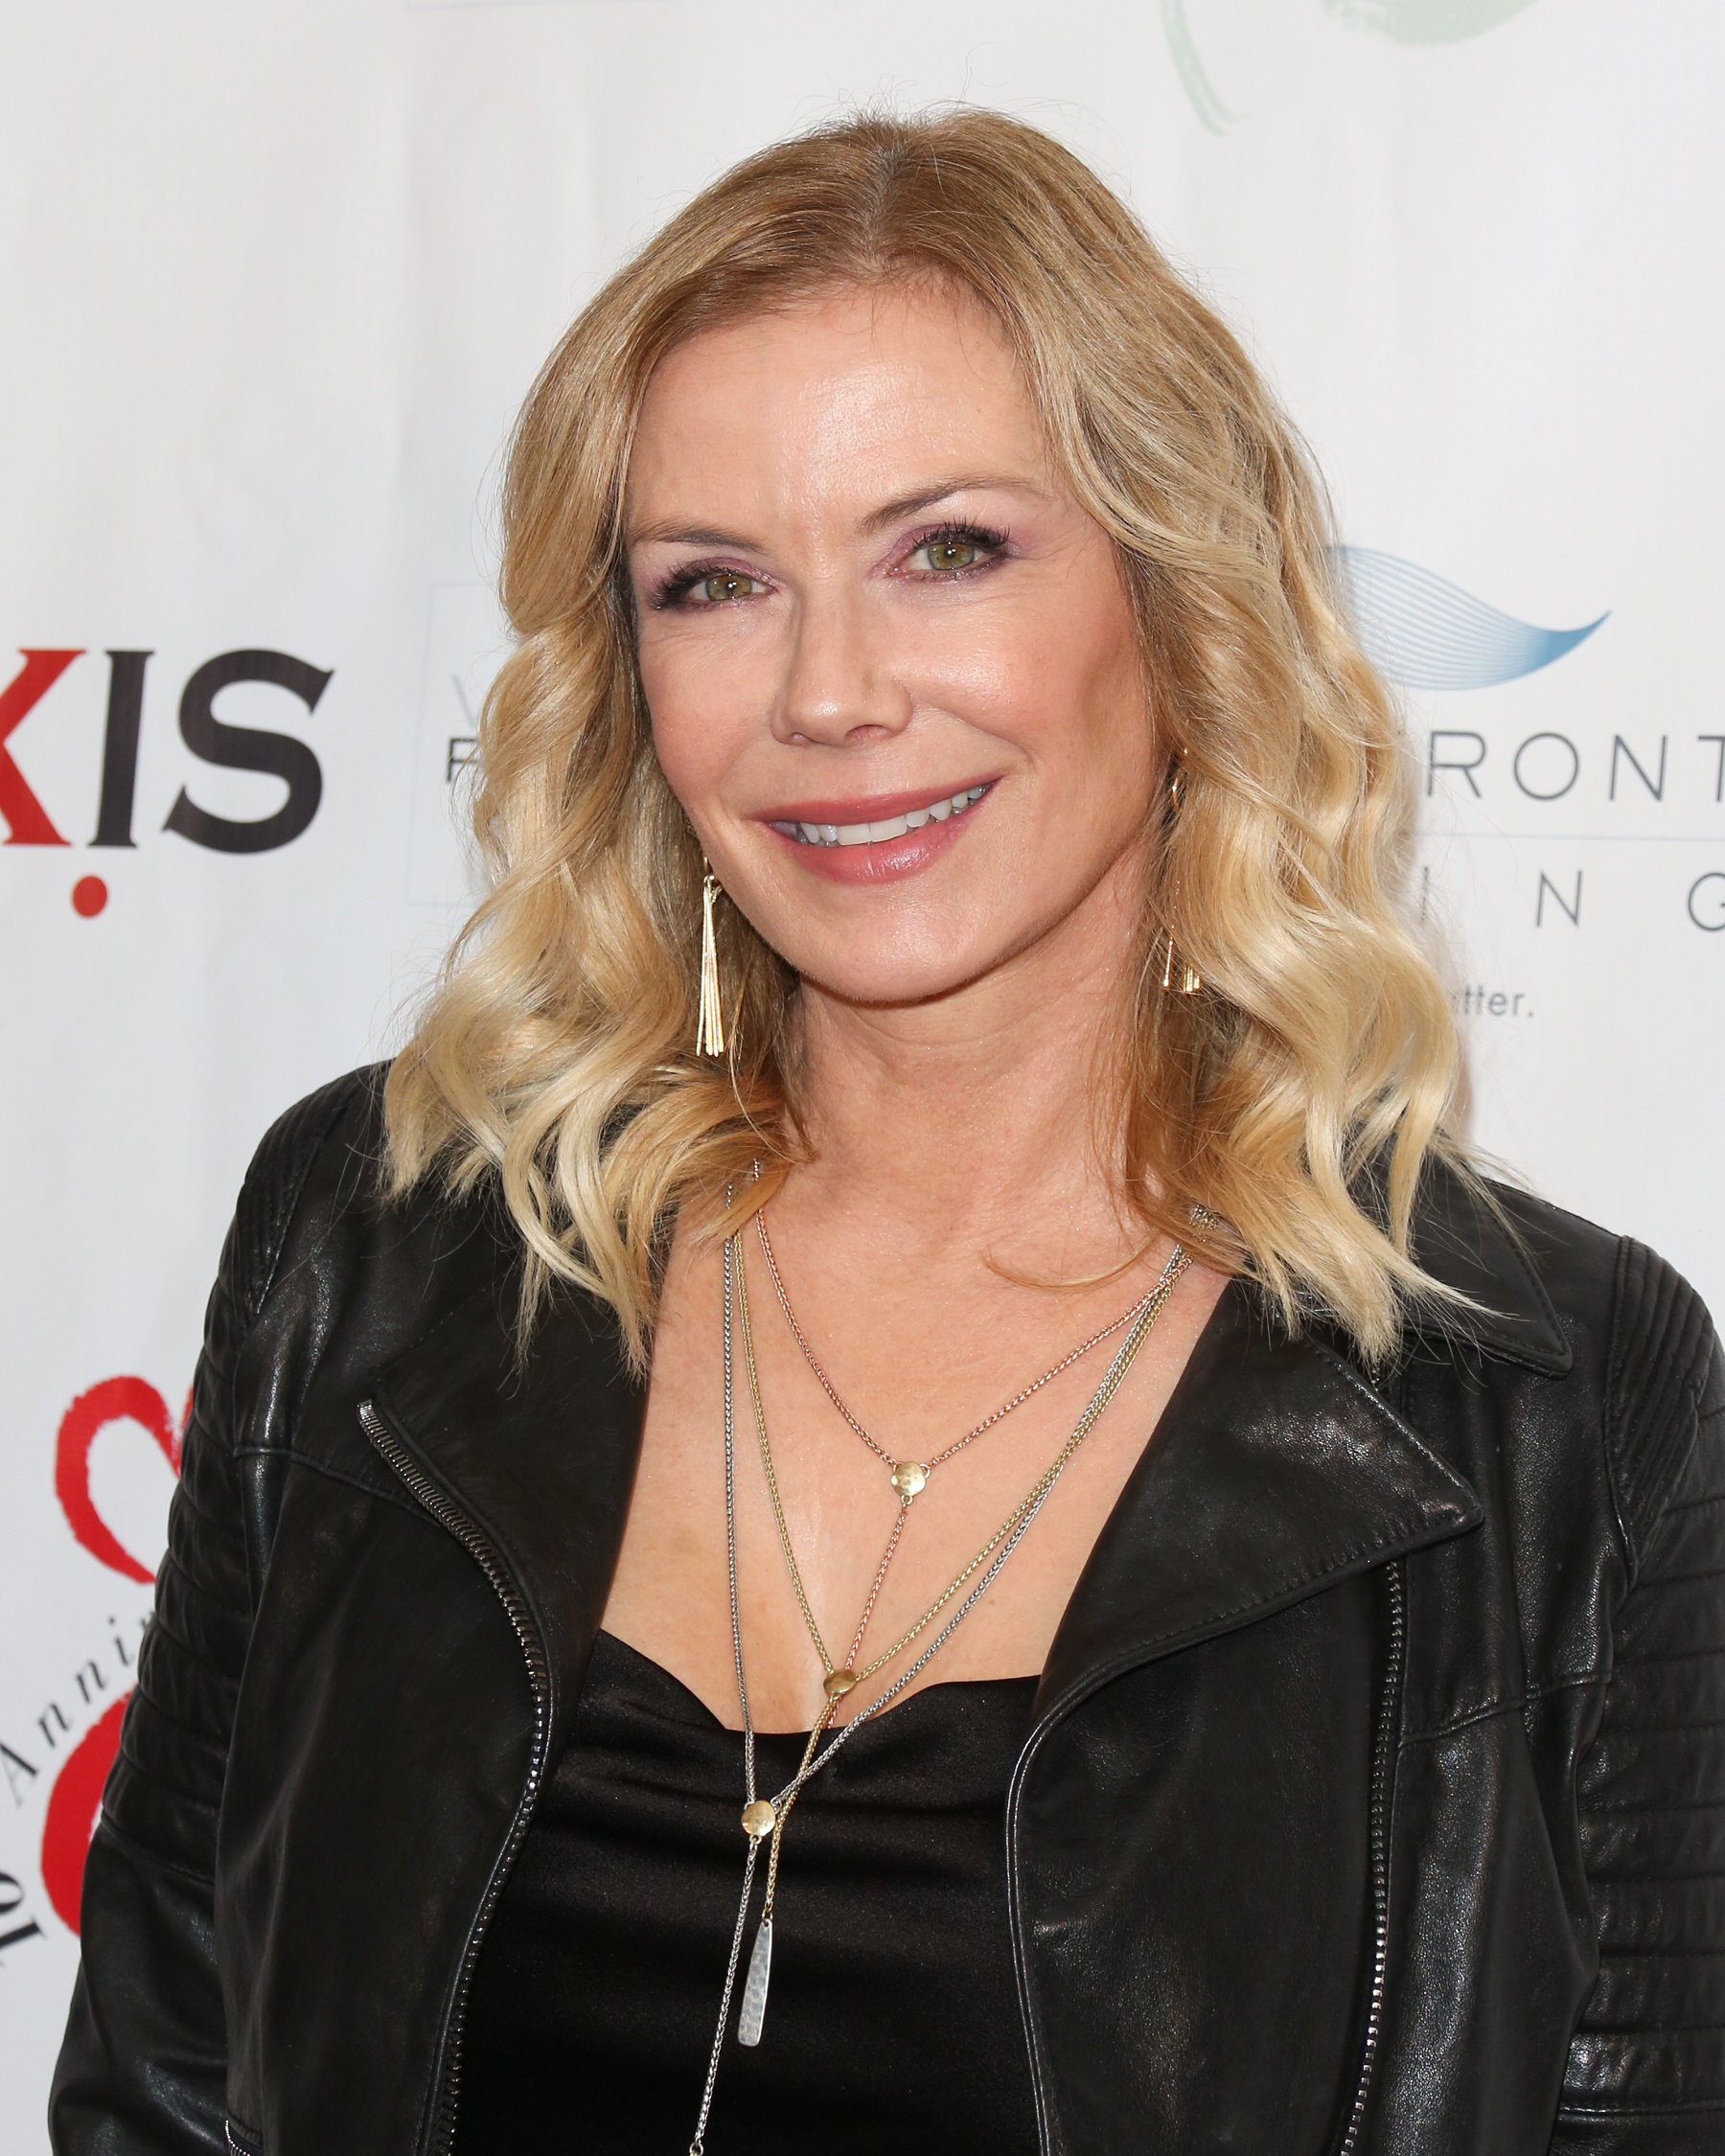 The Bold and the Beautiful star Katherine Kelly Lang, in a black jacket and black top, who plays Brooke